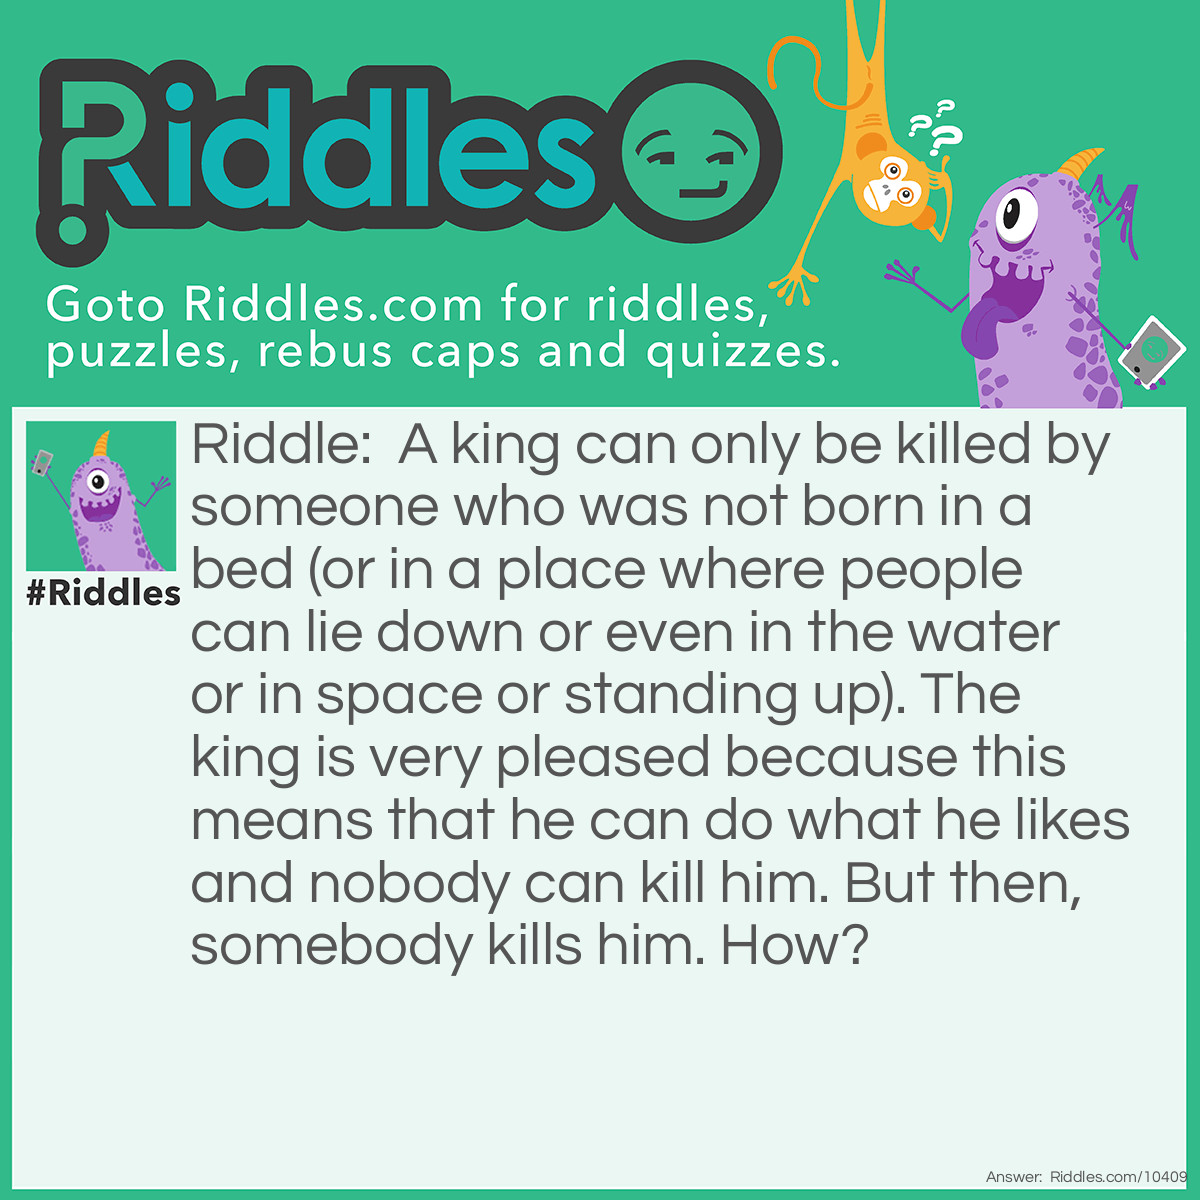 Riddle: A king can only be killed by someone who was not born in a bed (or in a place where people can lie down or even in the water or in space or standing up). The king is very pleased because this means that he can do what he likes and nobody can kill him. But then, somebody kills him. How? Answer: The murderer was born in an airplane that was going to crash so everyone was floating around in the air (but the driver got the controls to work just in time but only after the person had been born) and it was only possible for them to kill the king after that.